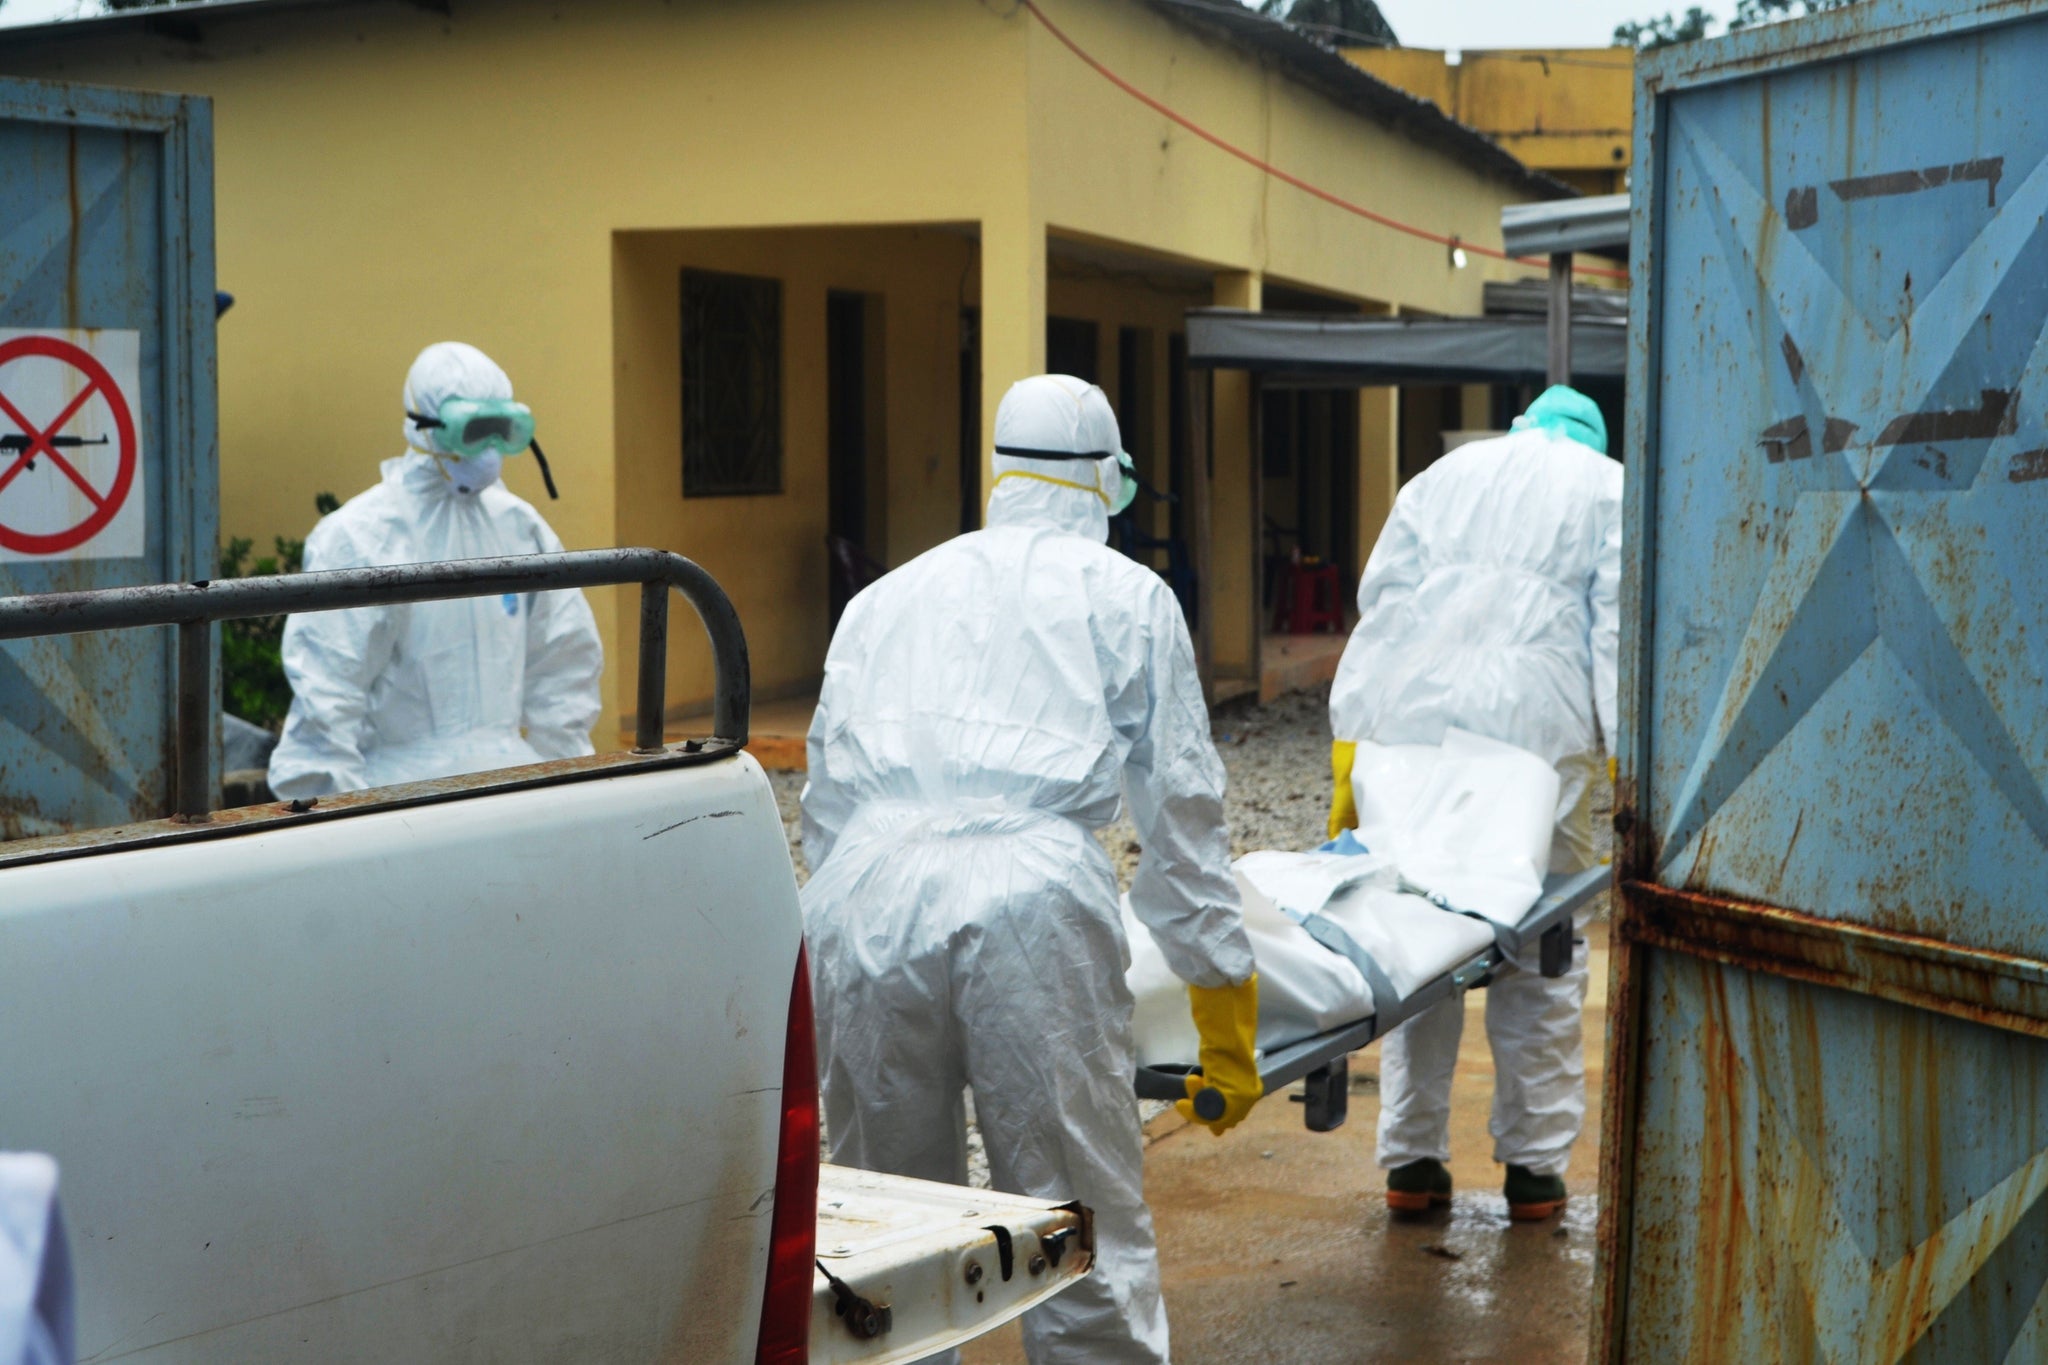 Guinea's Red Cross health workers wearing protective suits carry the body of a victim of Ebola virus at the NGO Medecin sans frontieres Ebola treatement centre near the hospital Donka in Conakry on September 14, 2014.